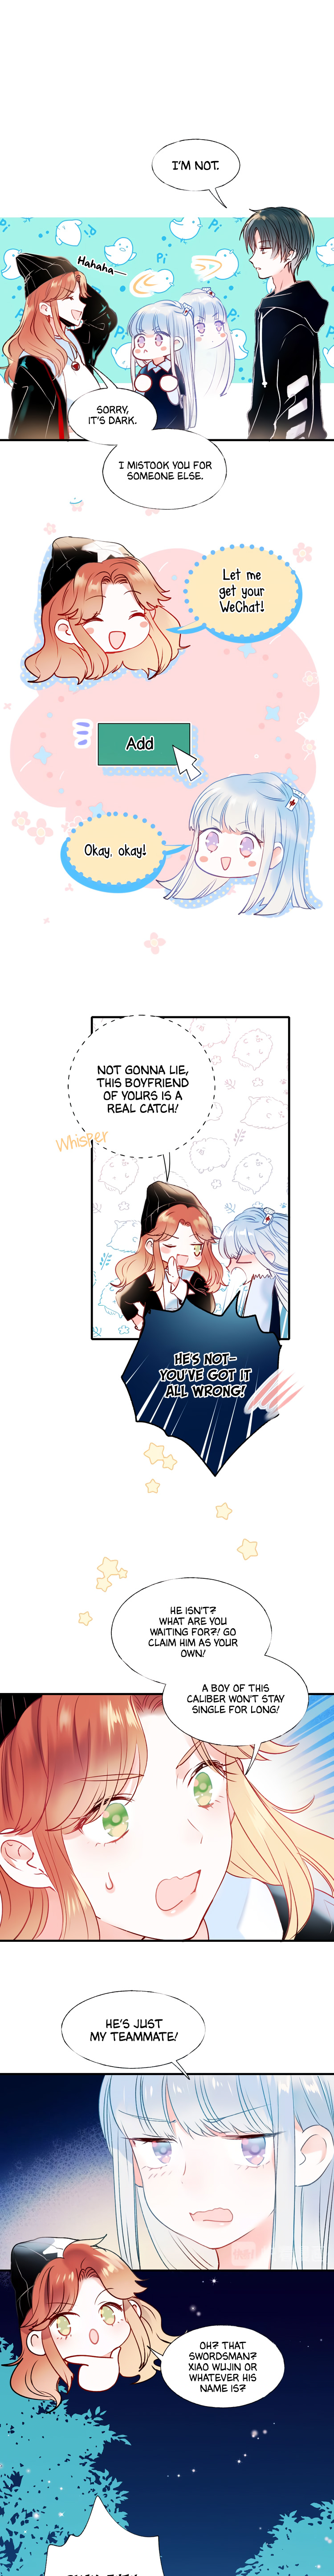 To Be Winner Ch. 44 mysterious delivery